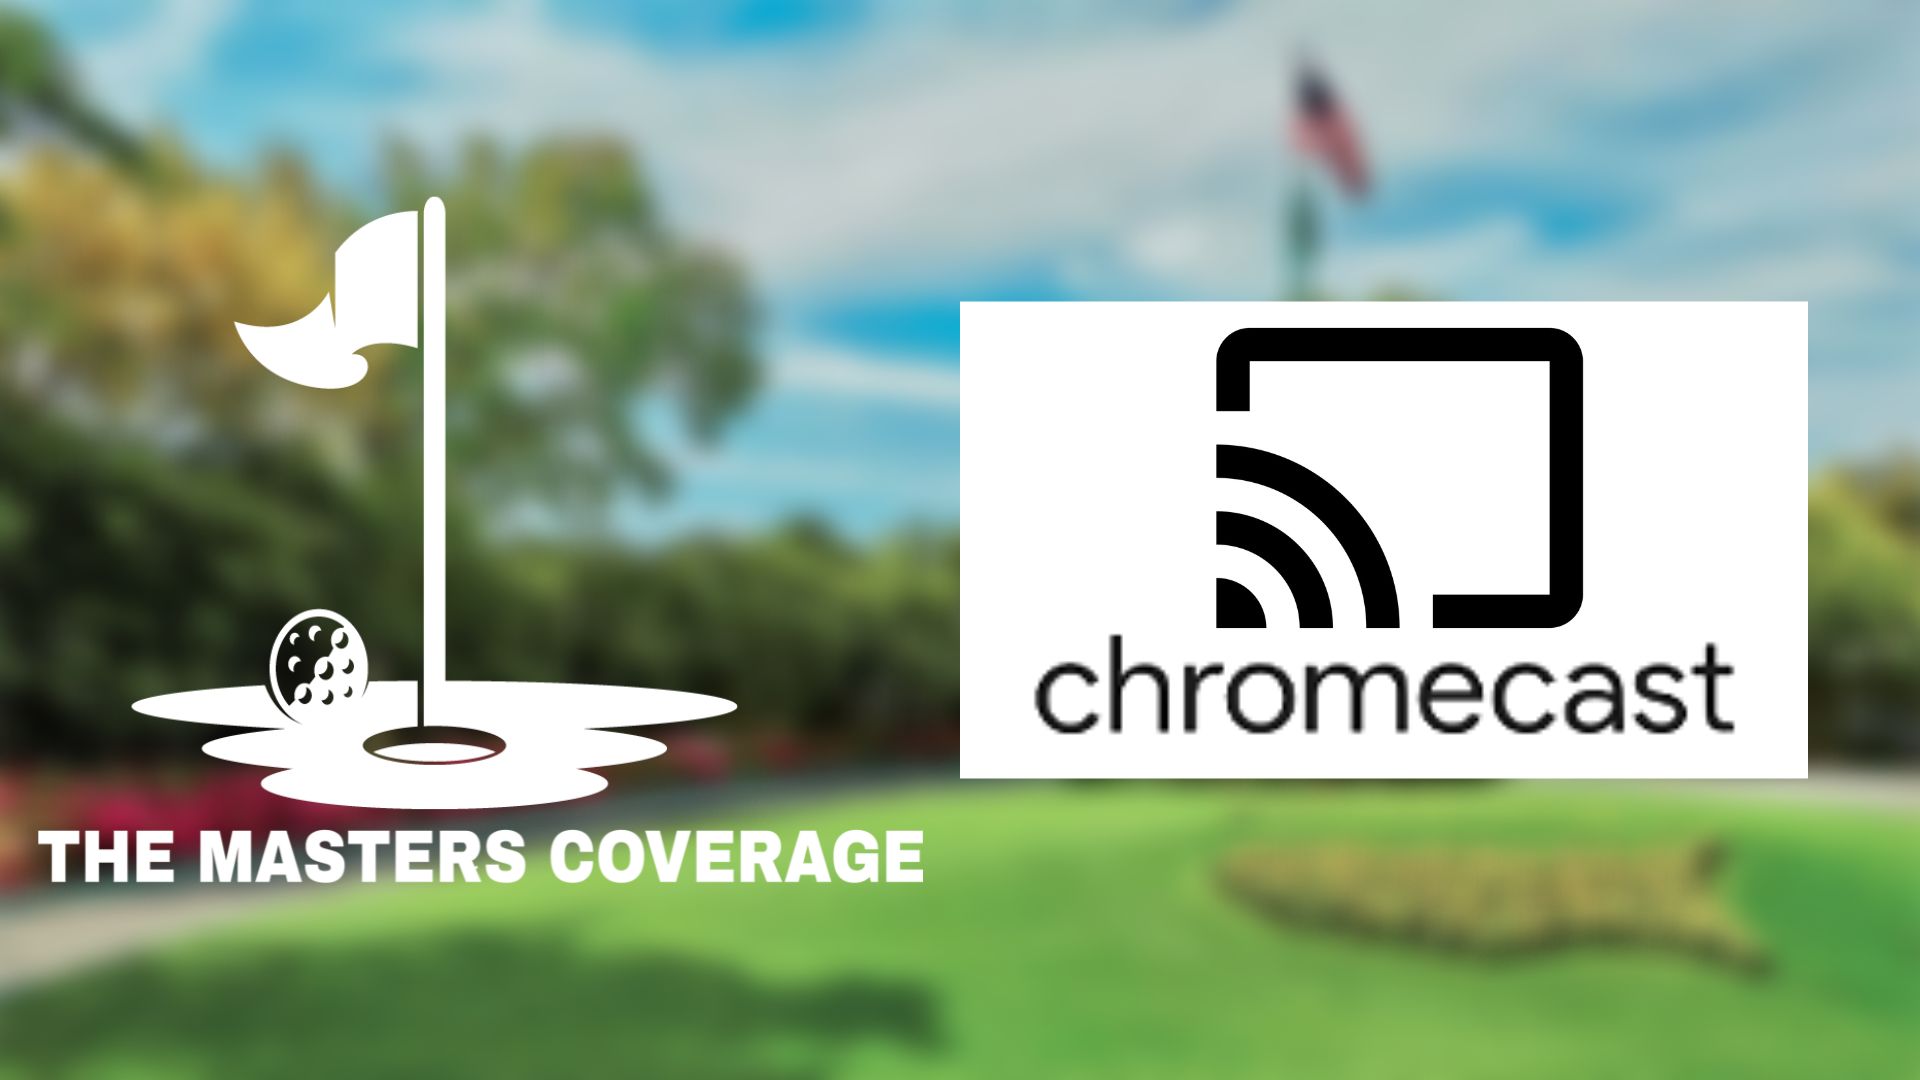 How to Watch The Masters Golf on Chromecast